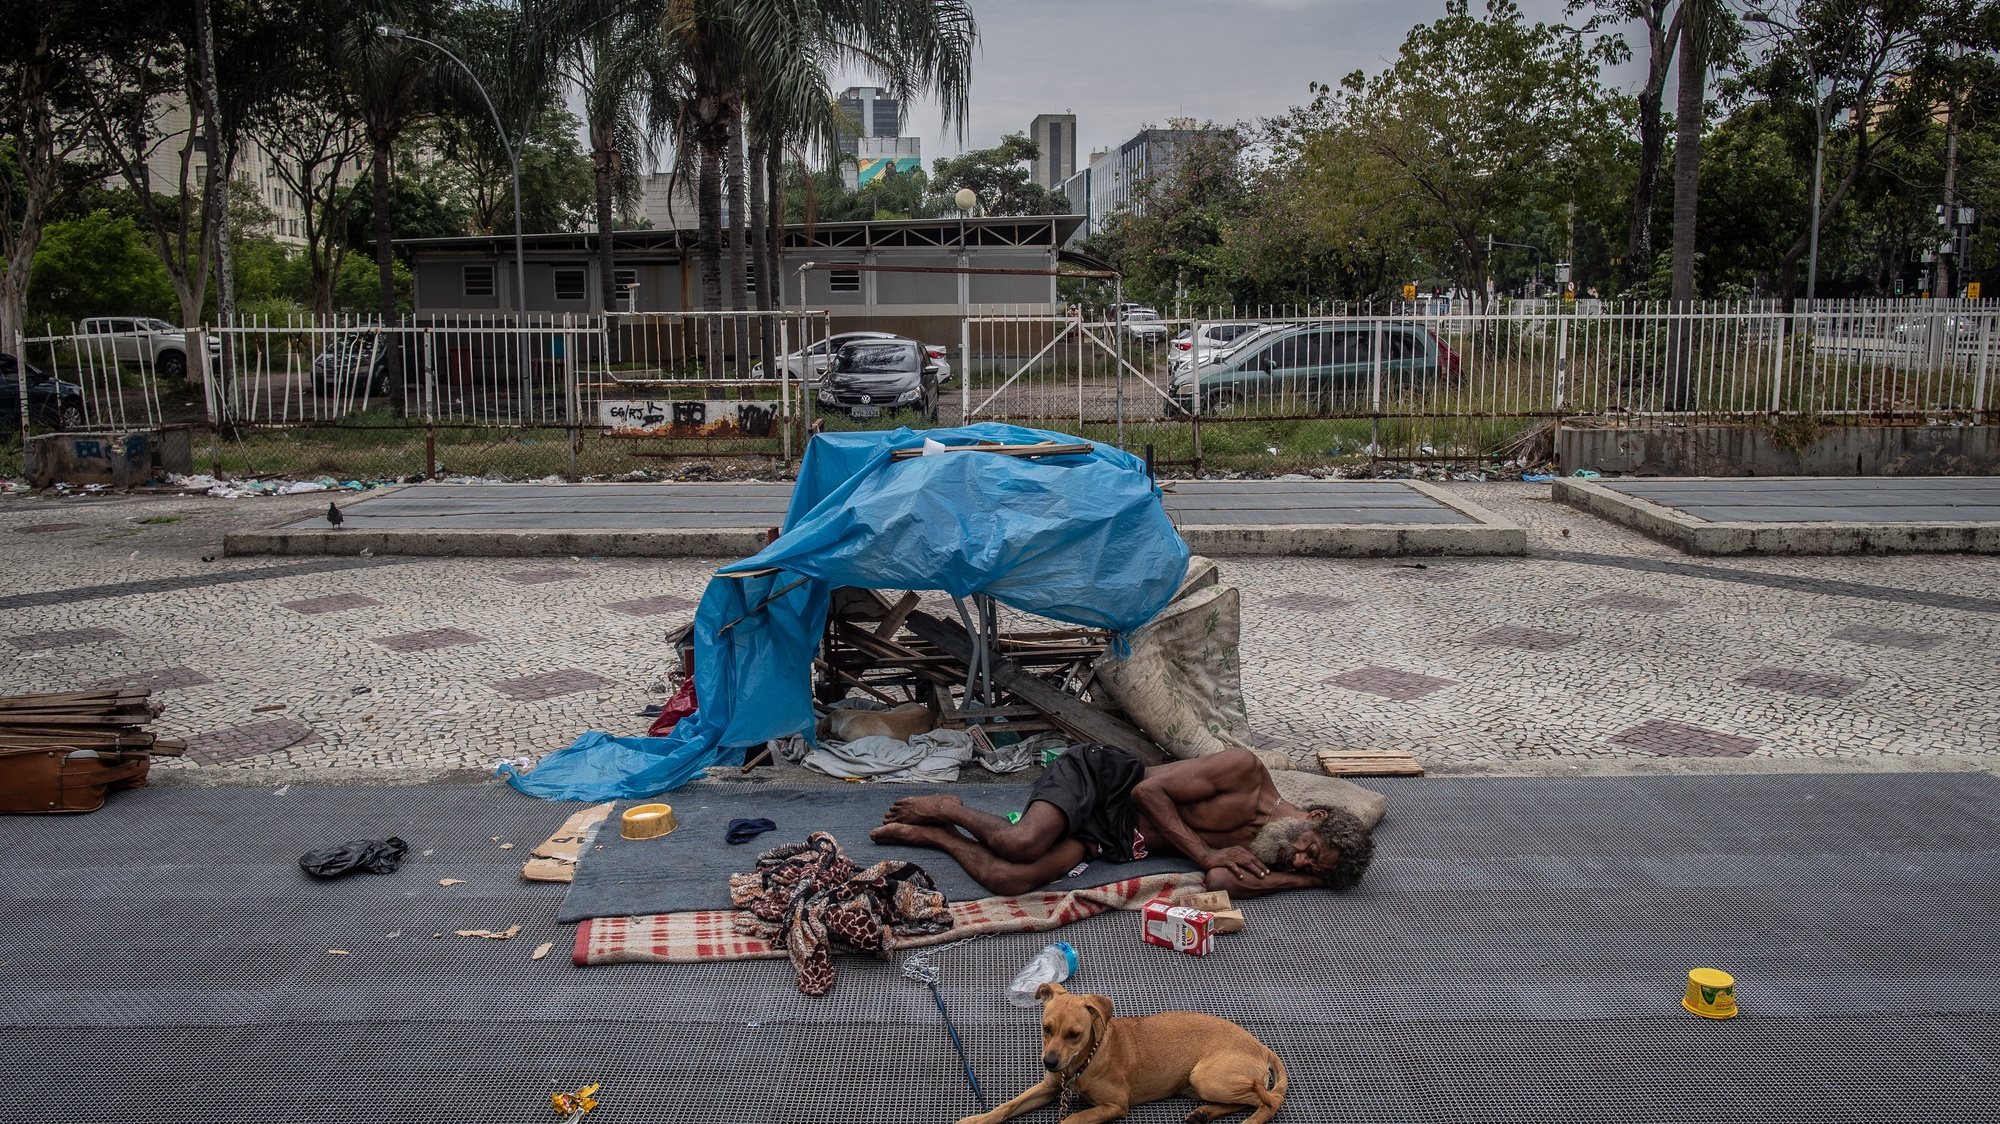 epa10209671 A man sleeps in front of his shelter in Rio de Janeiro, Brazil, 20 September 2022 (Issued 27 September 2022).The presidential campaigns in Brazil focused on 33 million poor people affected by hunger, a situation that has not changed despite changes in government.  EPA/ANDRE COELHO